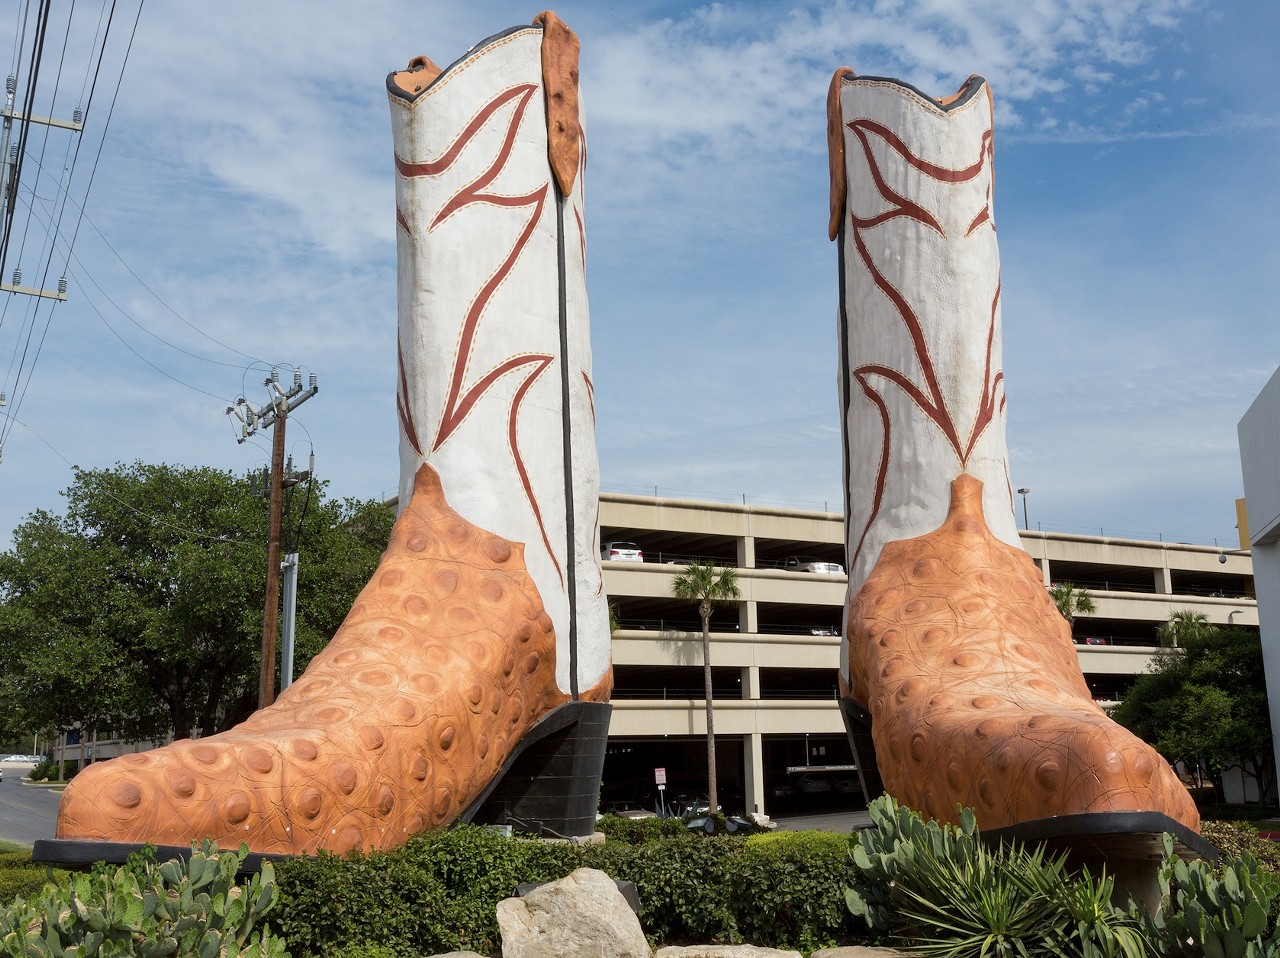 San Antonio is home to the World's Largest Cowboy Boots. 
Made by the larger-than-life artist Bob "Daddy-O" Wade, these boots were installed at North Star in 1979 and officially made it into the Guinness Book of World Records as the World's Largest Cowboy Boots four decades later.